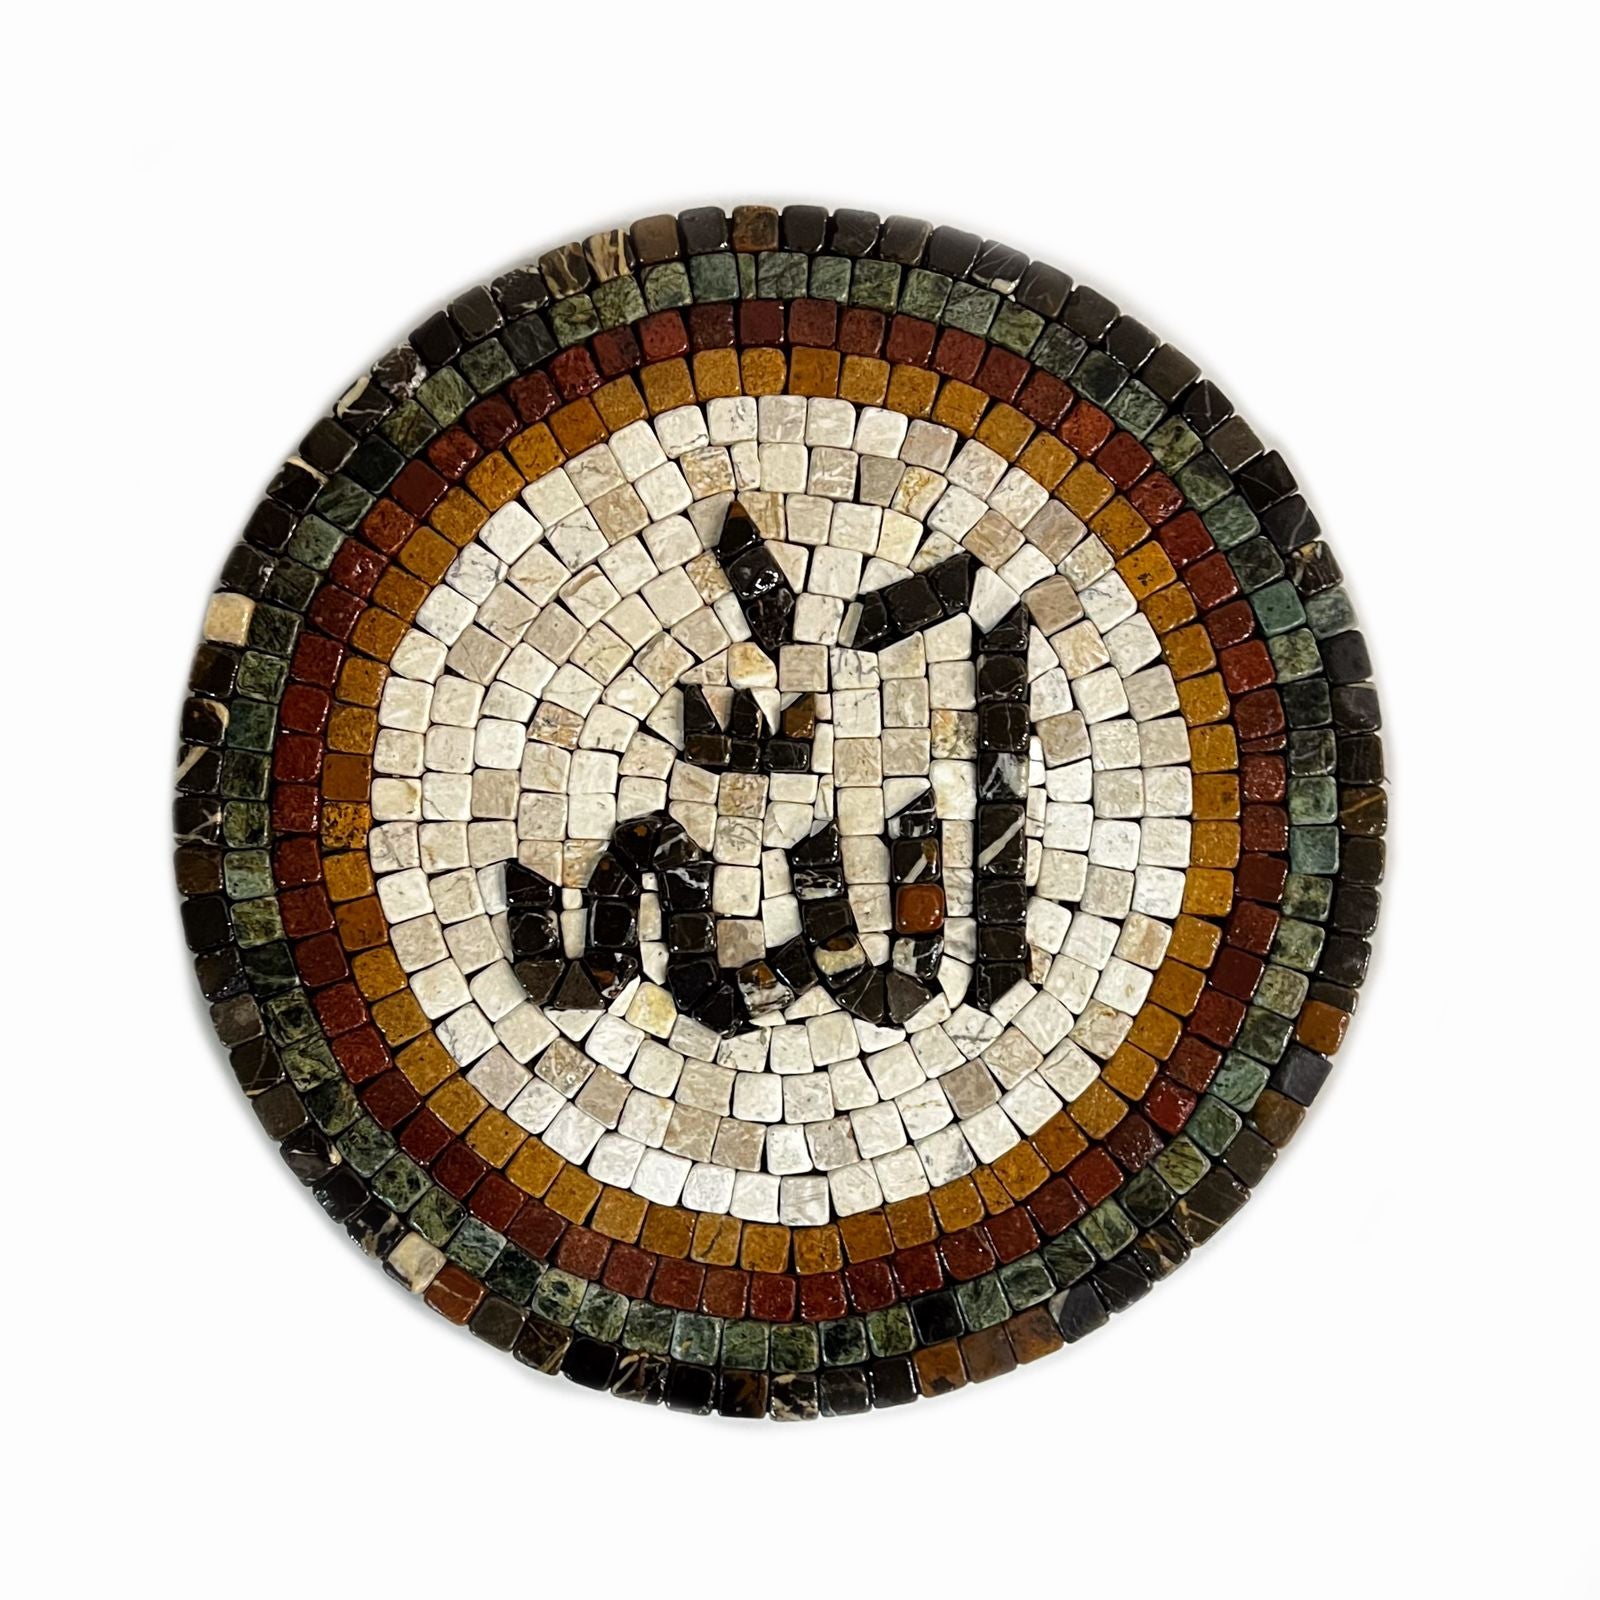 ALLAH STONED - Mosaic By Qureshi's